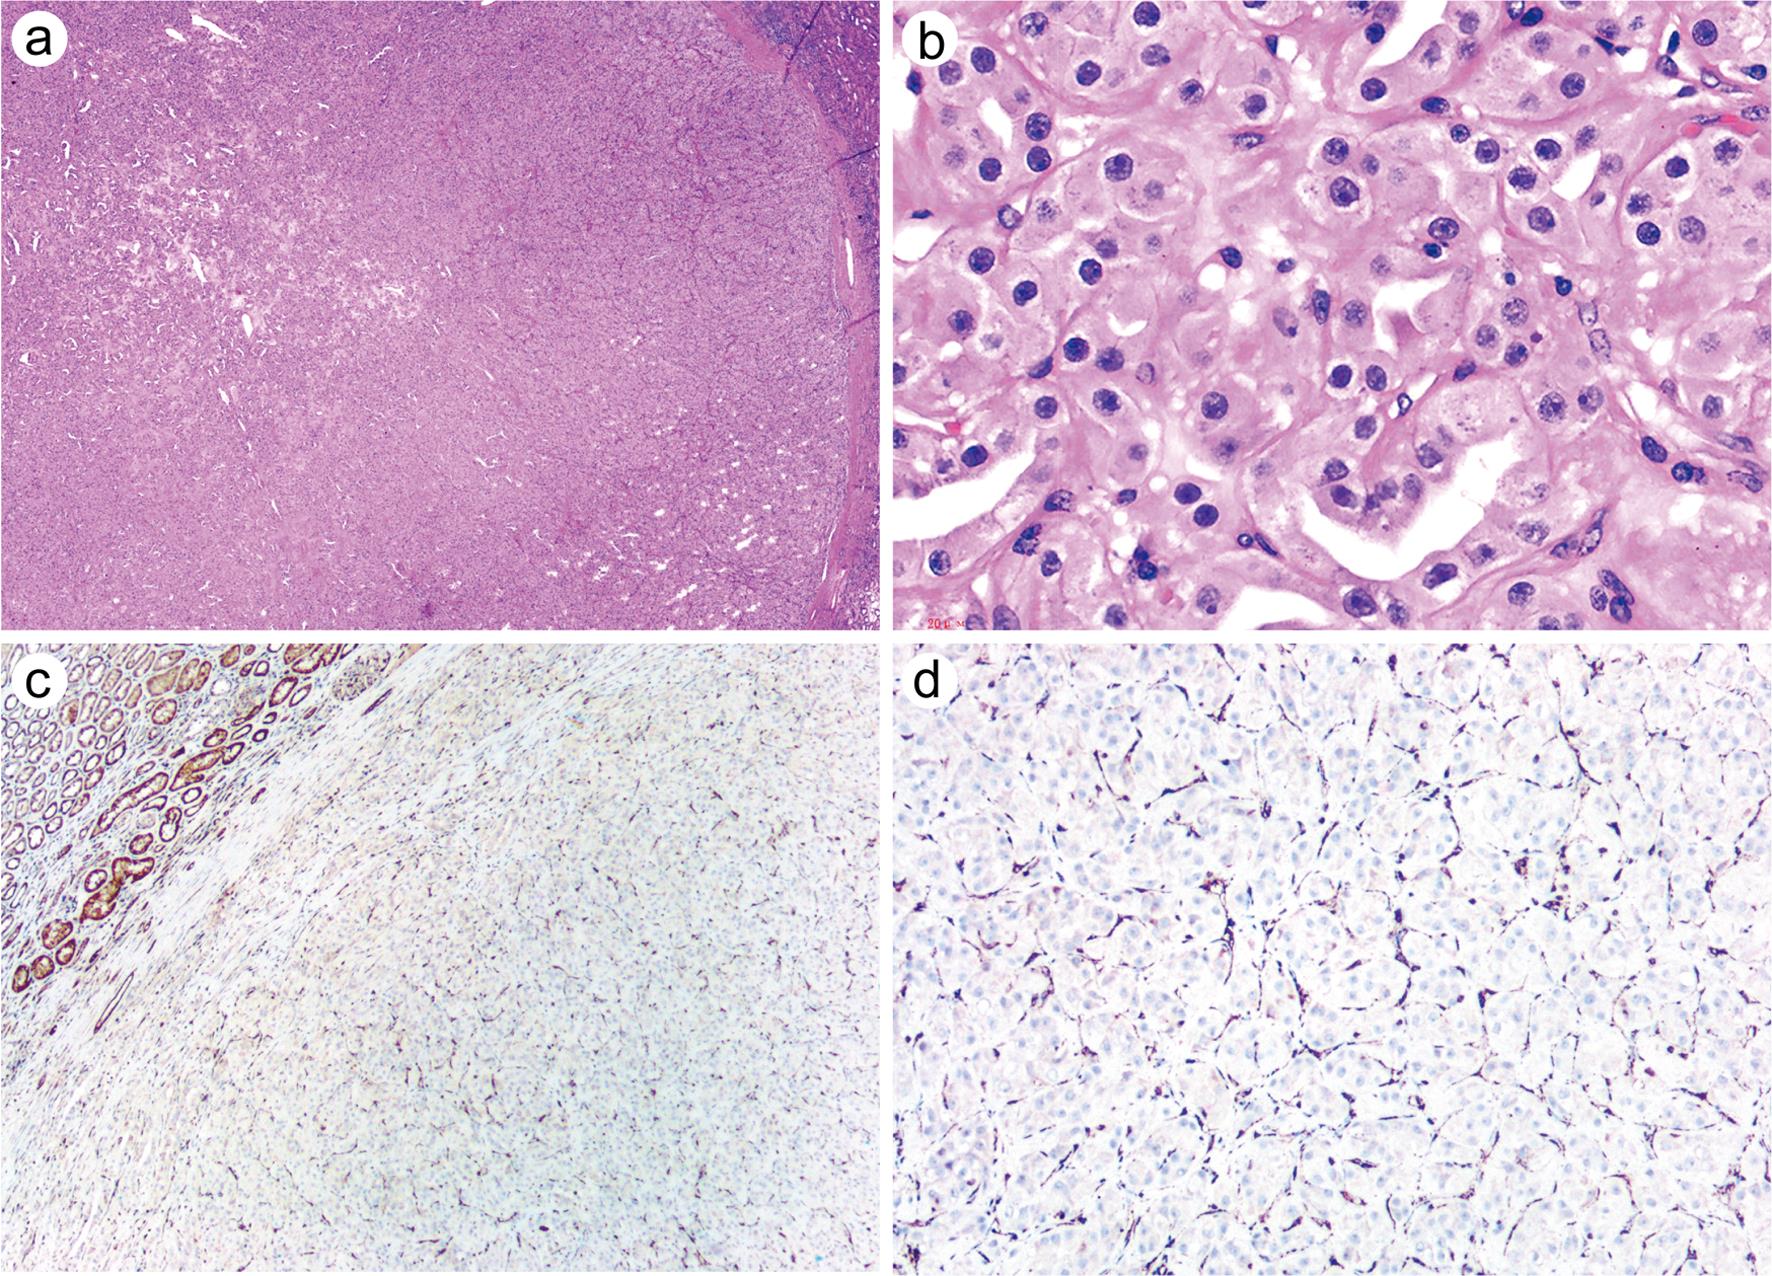 Low-grade oncocytic fumarate hydratase-deficient renal cell carcinoma.